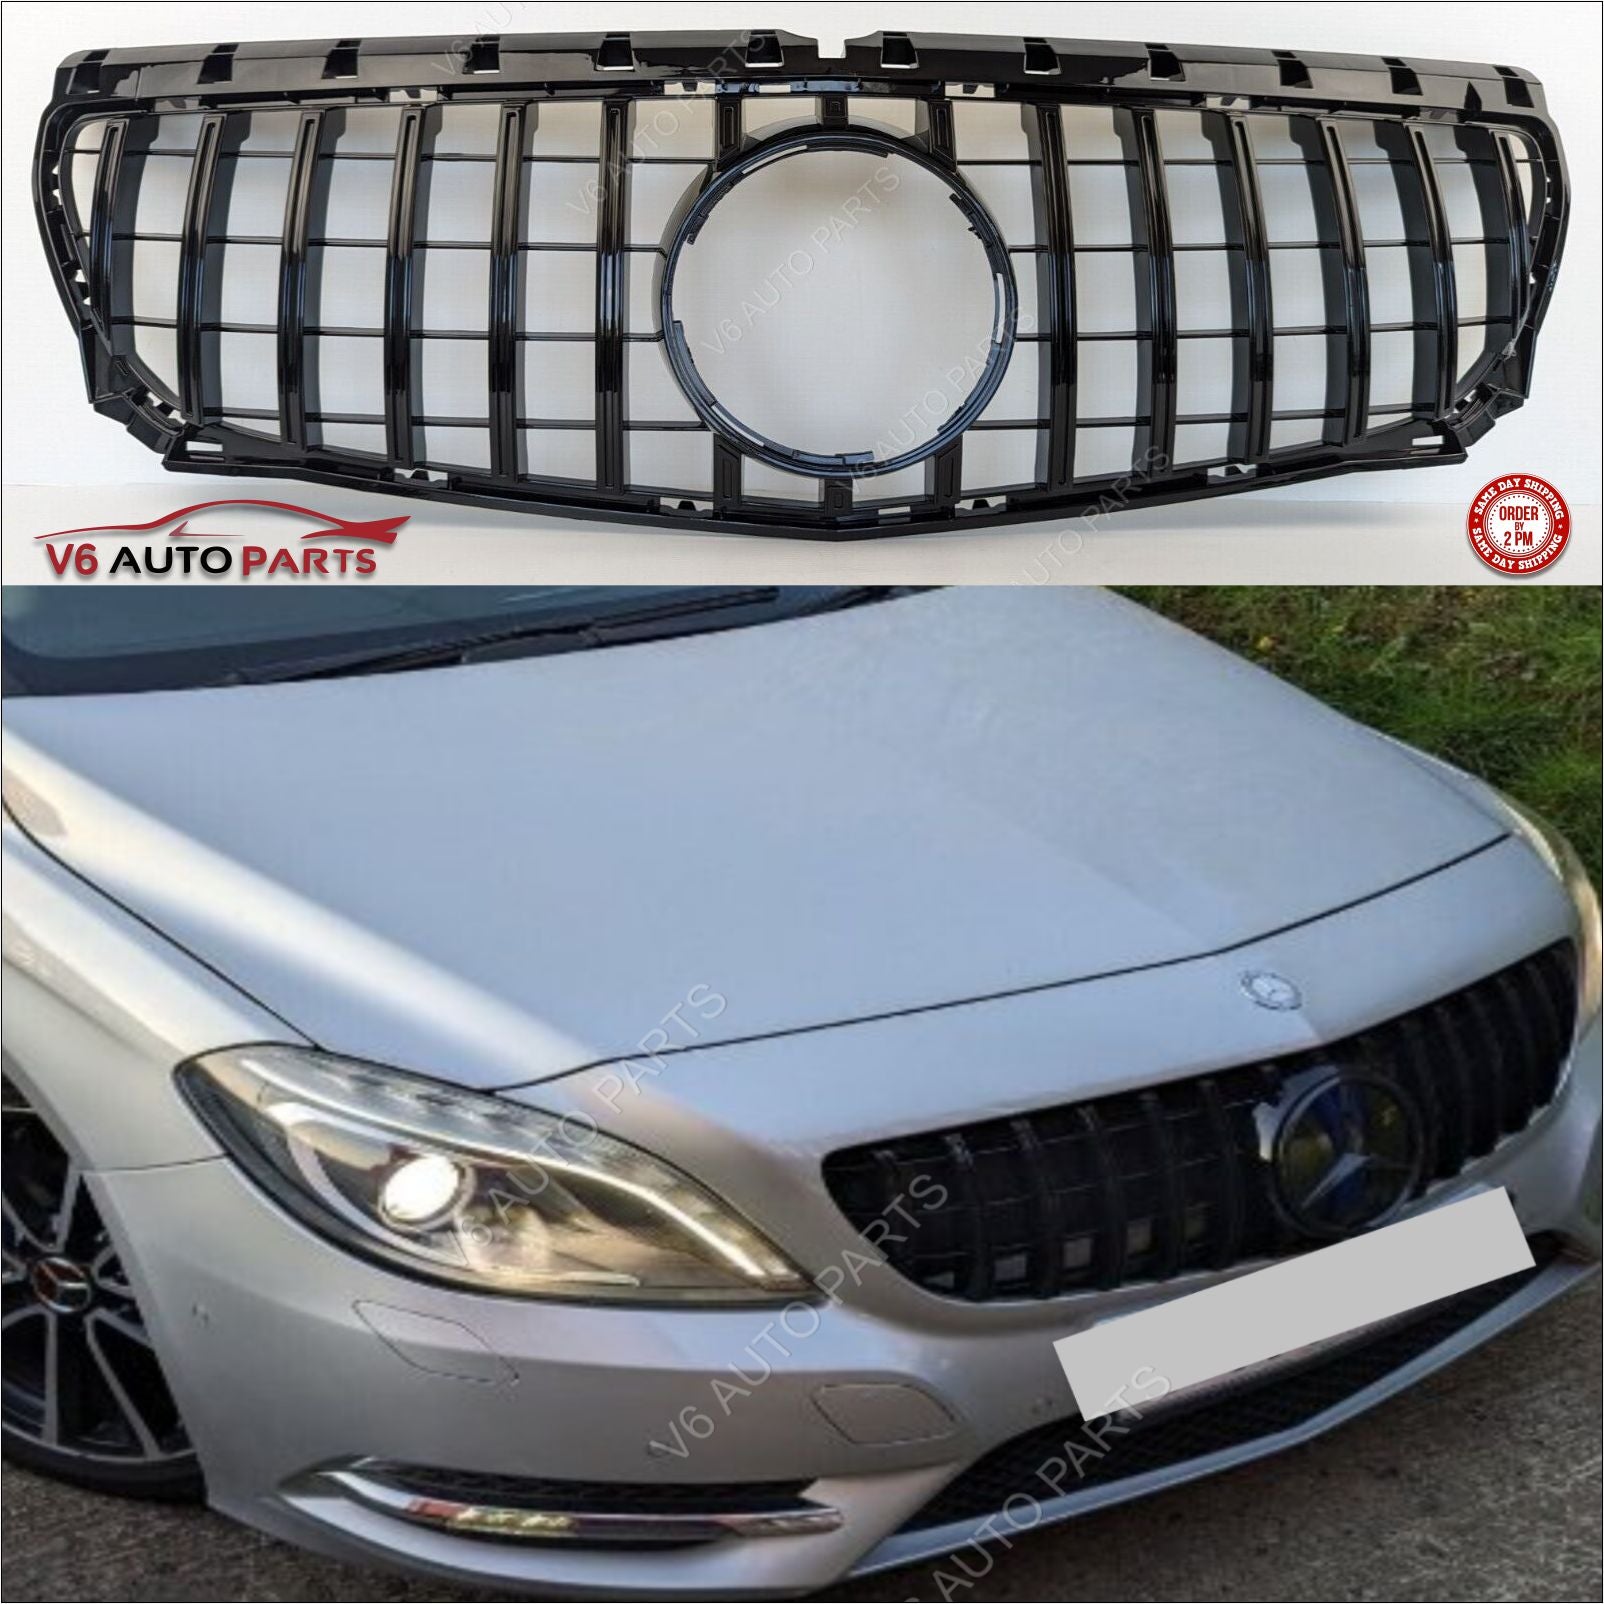 For Mercedes B-Class W246 B180 B200 Front GT Grill B250 Bumper Grille 2011-2014